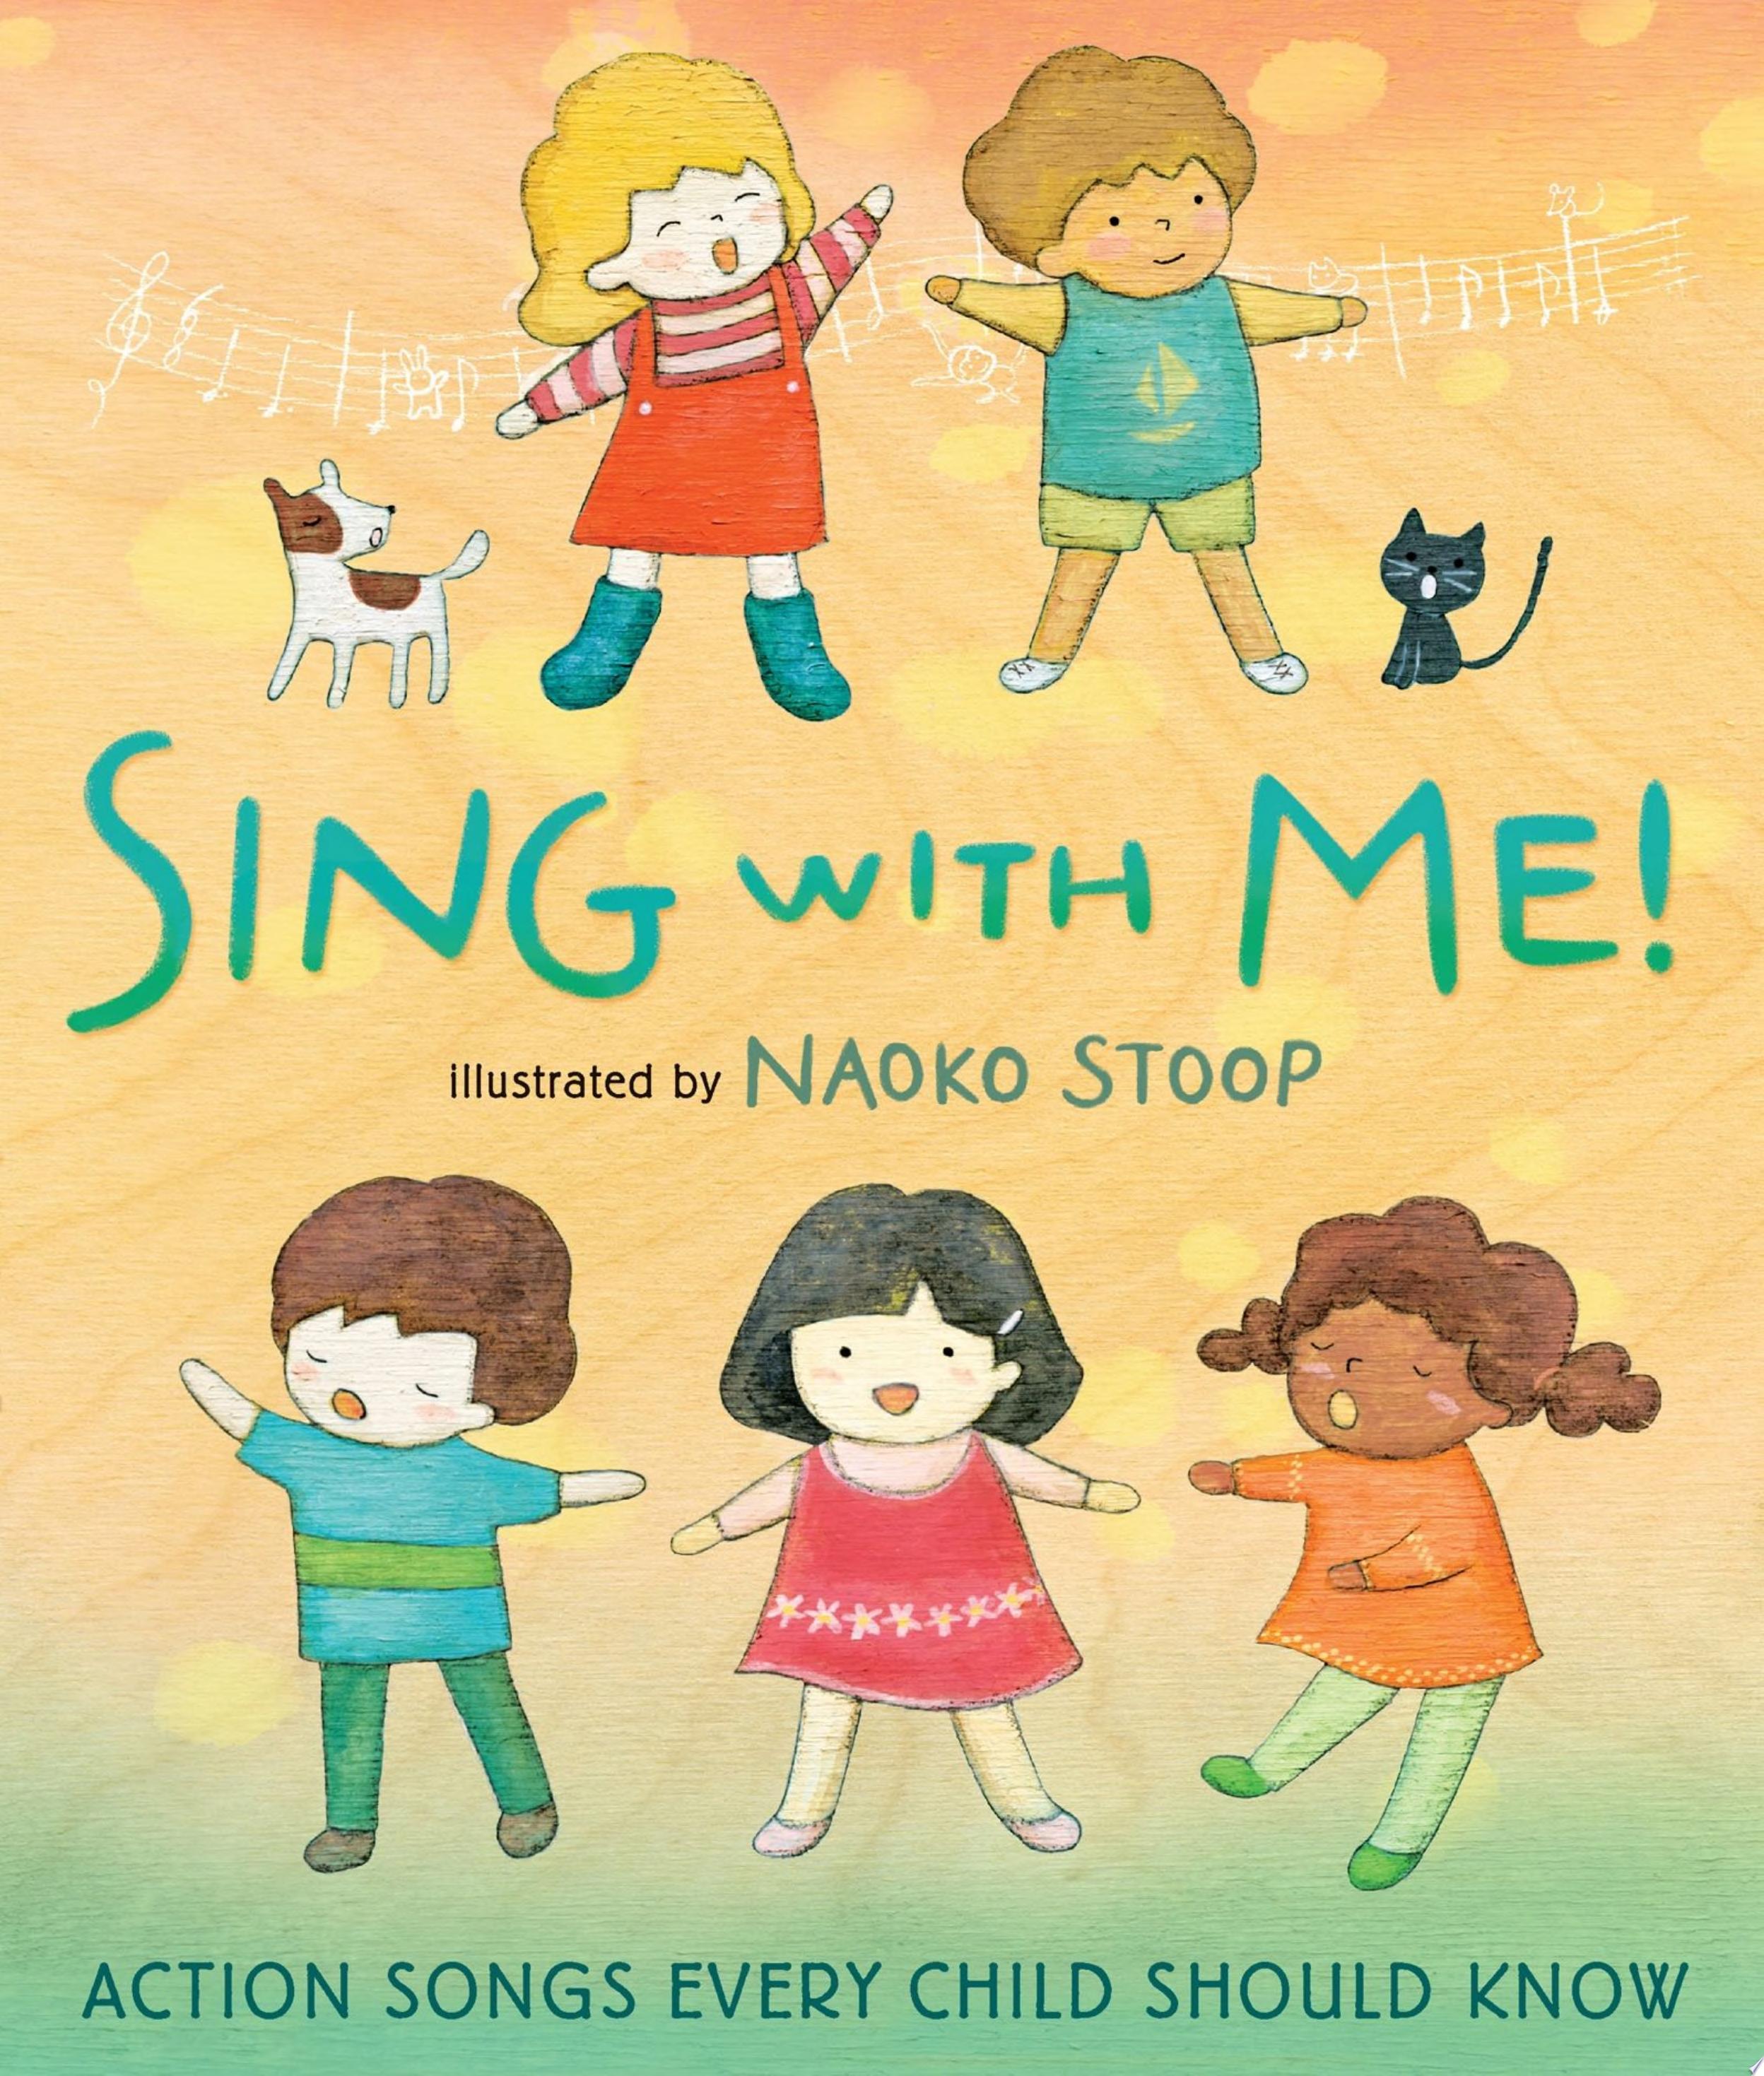 Image for "Sing with Me!"